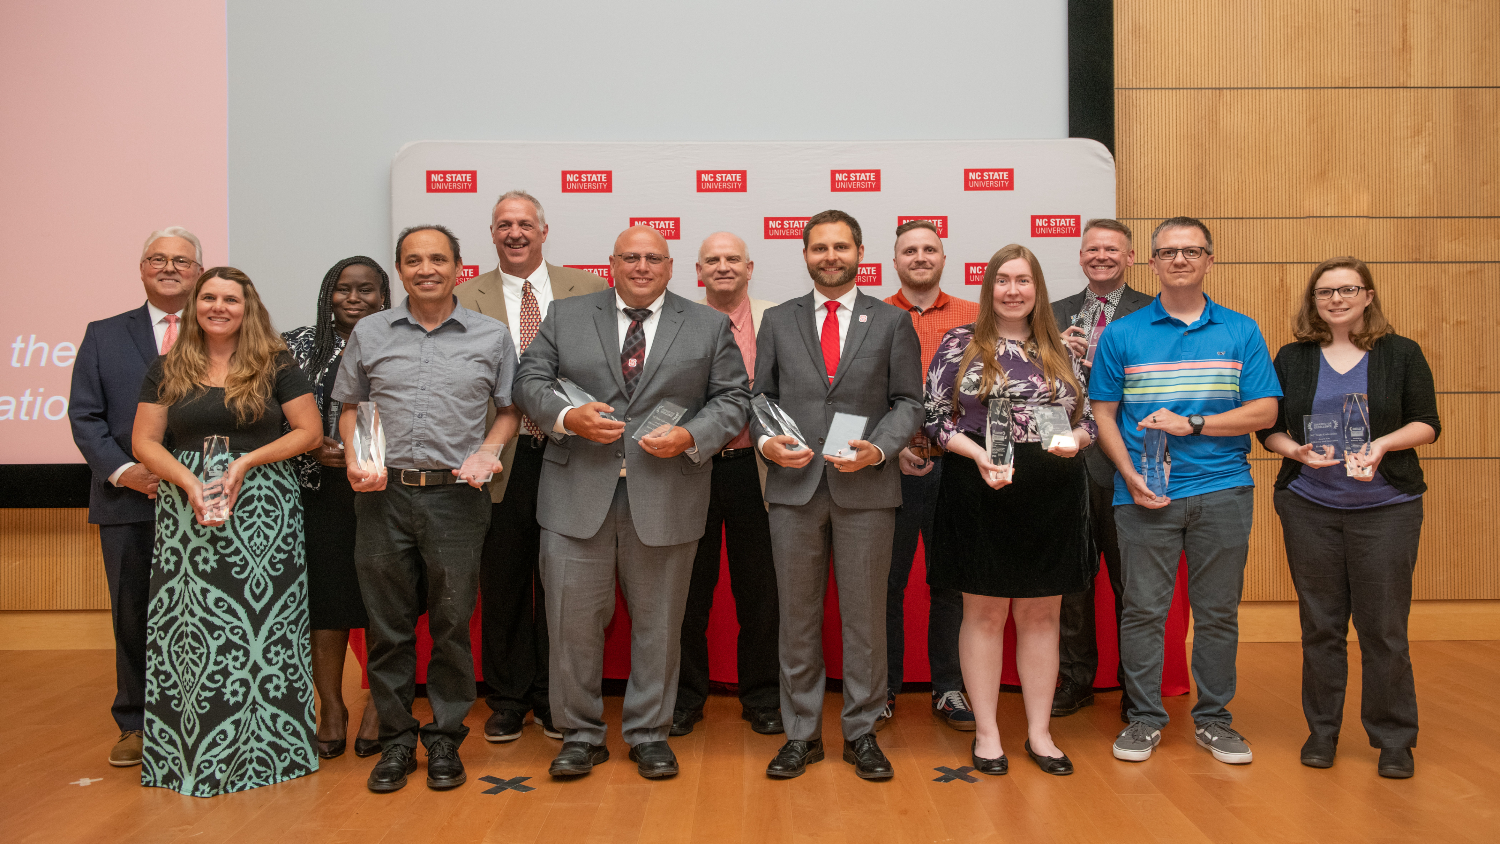 Chancellor Randy Woodson (back row, left) poses with the 2023 Award for Excellence winners. The winners (from left to right) are Karen Blaedow, Shannon DuPree, Jeffrey Luz, Vince Rogers, Steve Johnston, Bill Carlson, Connor Jones, Dan Spencer, Alyssa Jennings, Alan Porch, David Wagner and Kelsey Mills.